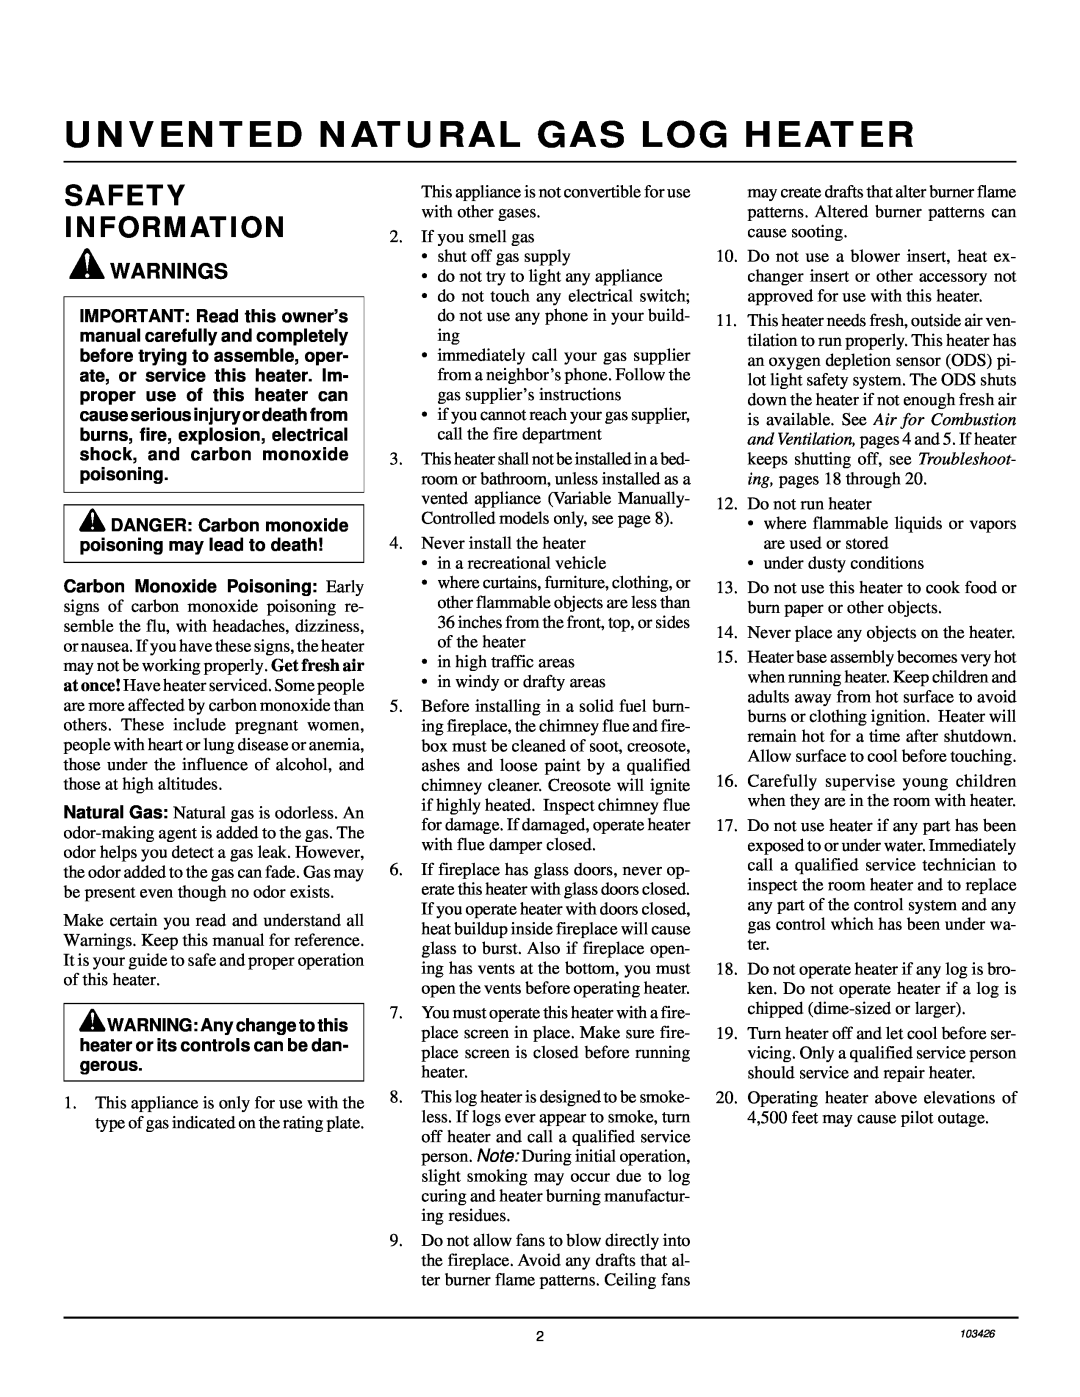 Desa 103426-01 installation manual Unvented Natural Gas Log Heater, Safety Information, Warnings 